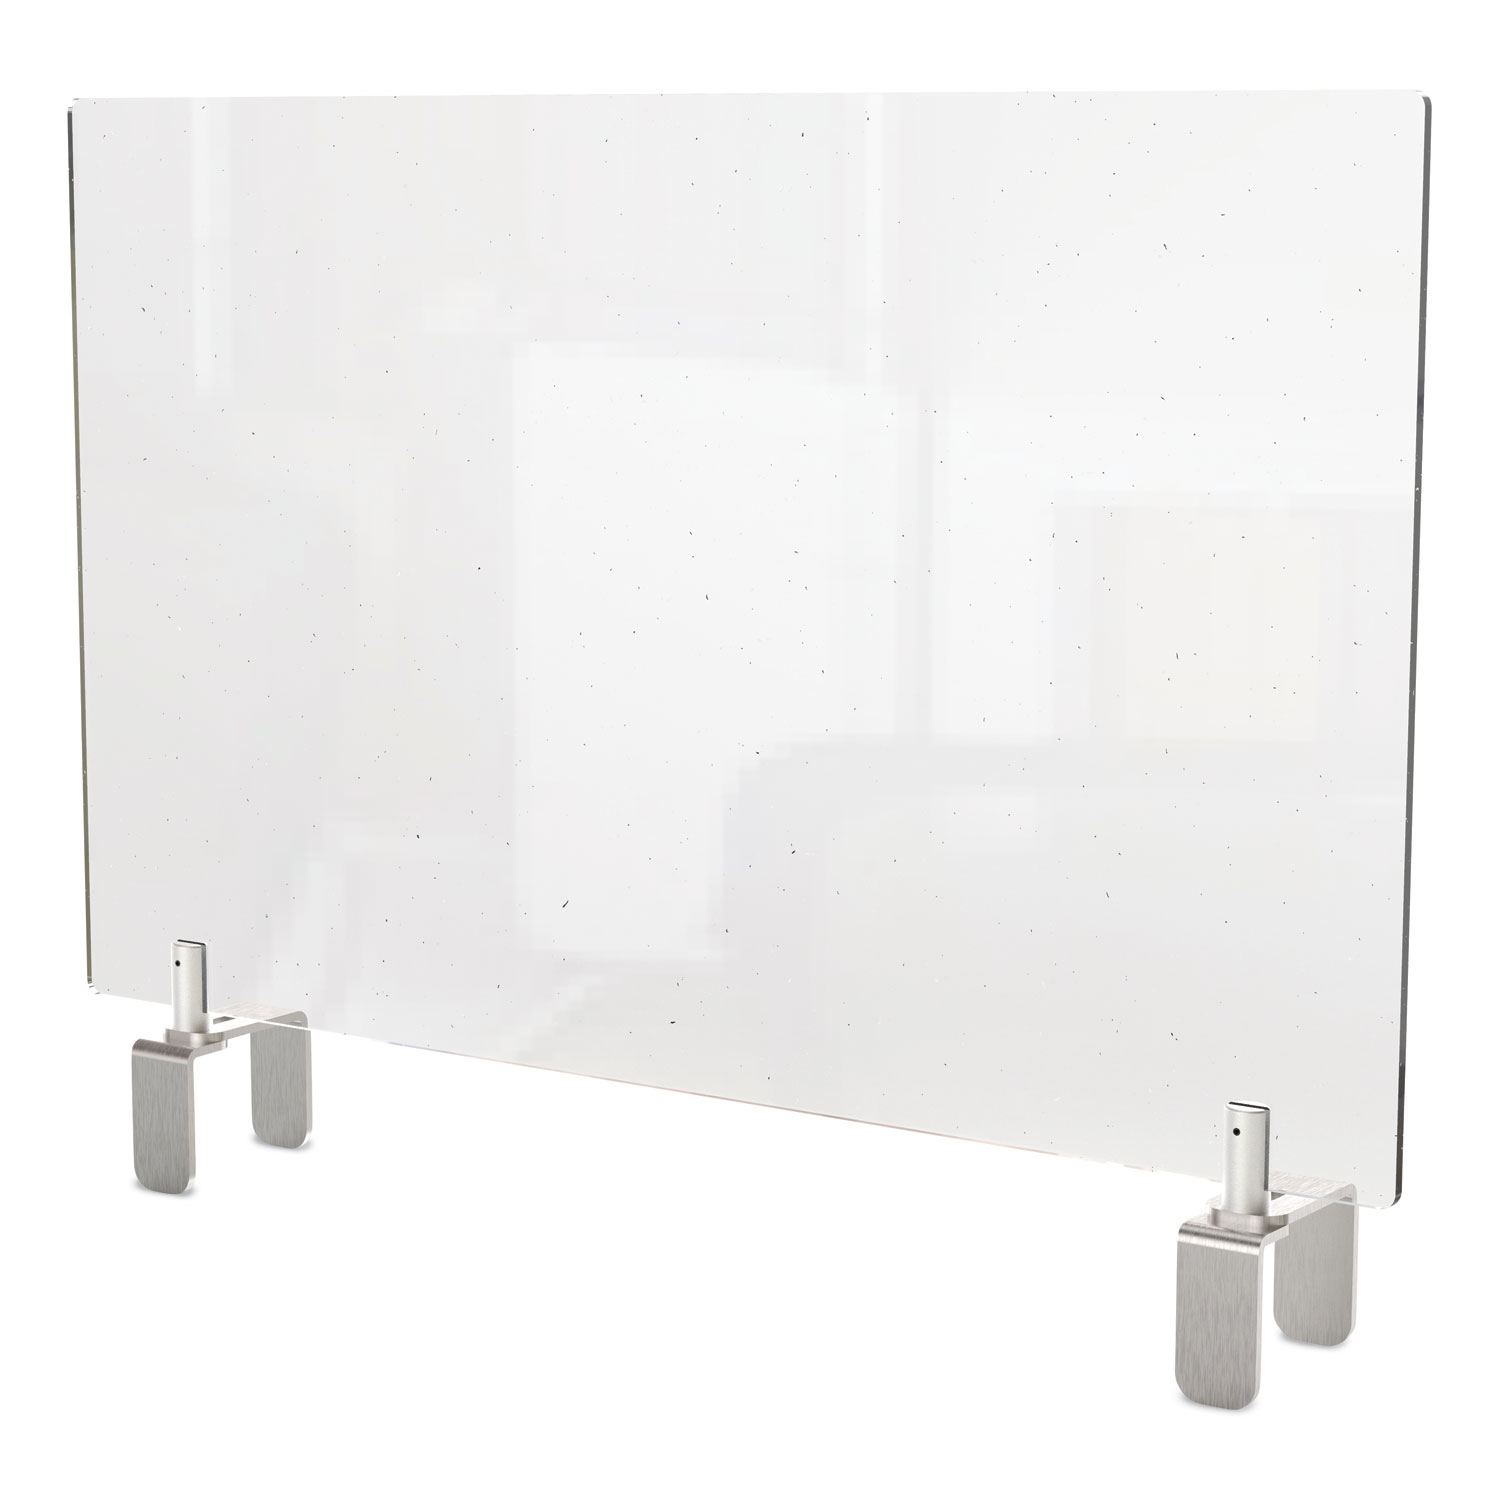  Ghent PEC2436-A Clear Partition Extender with Attached Clamp, 36 x 3.88 x 24, Thermoplastic Sheeting (GHEPEC2436A) 